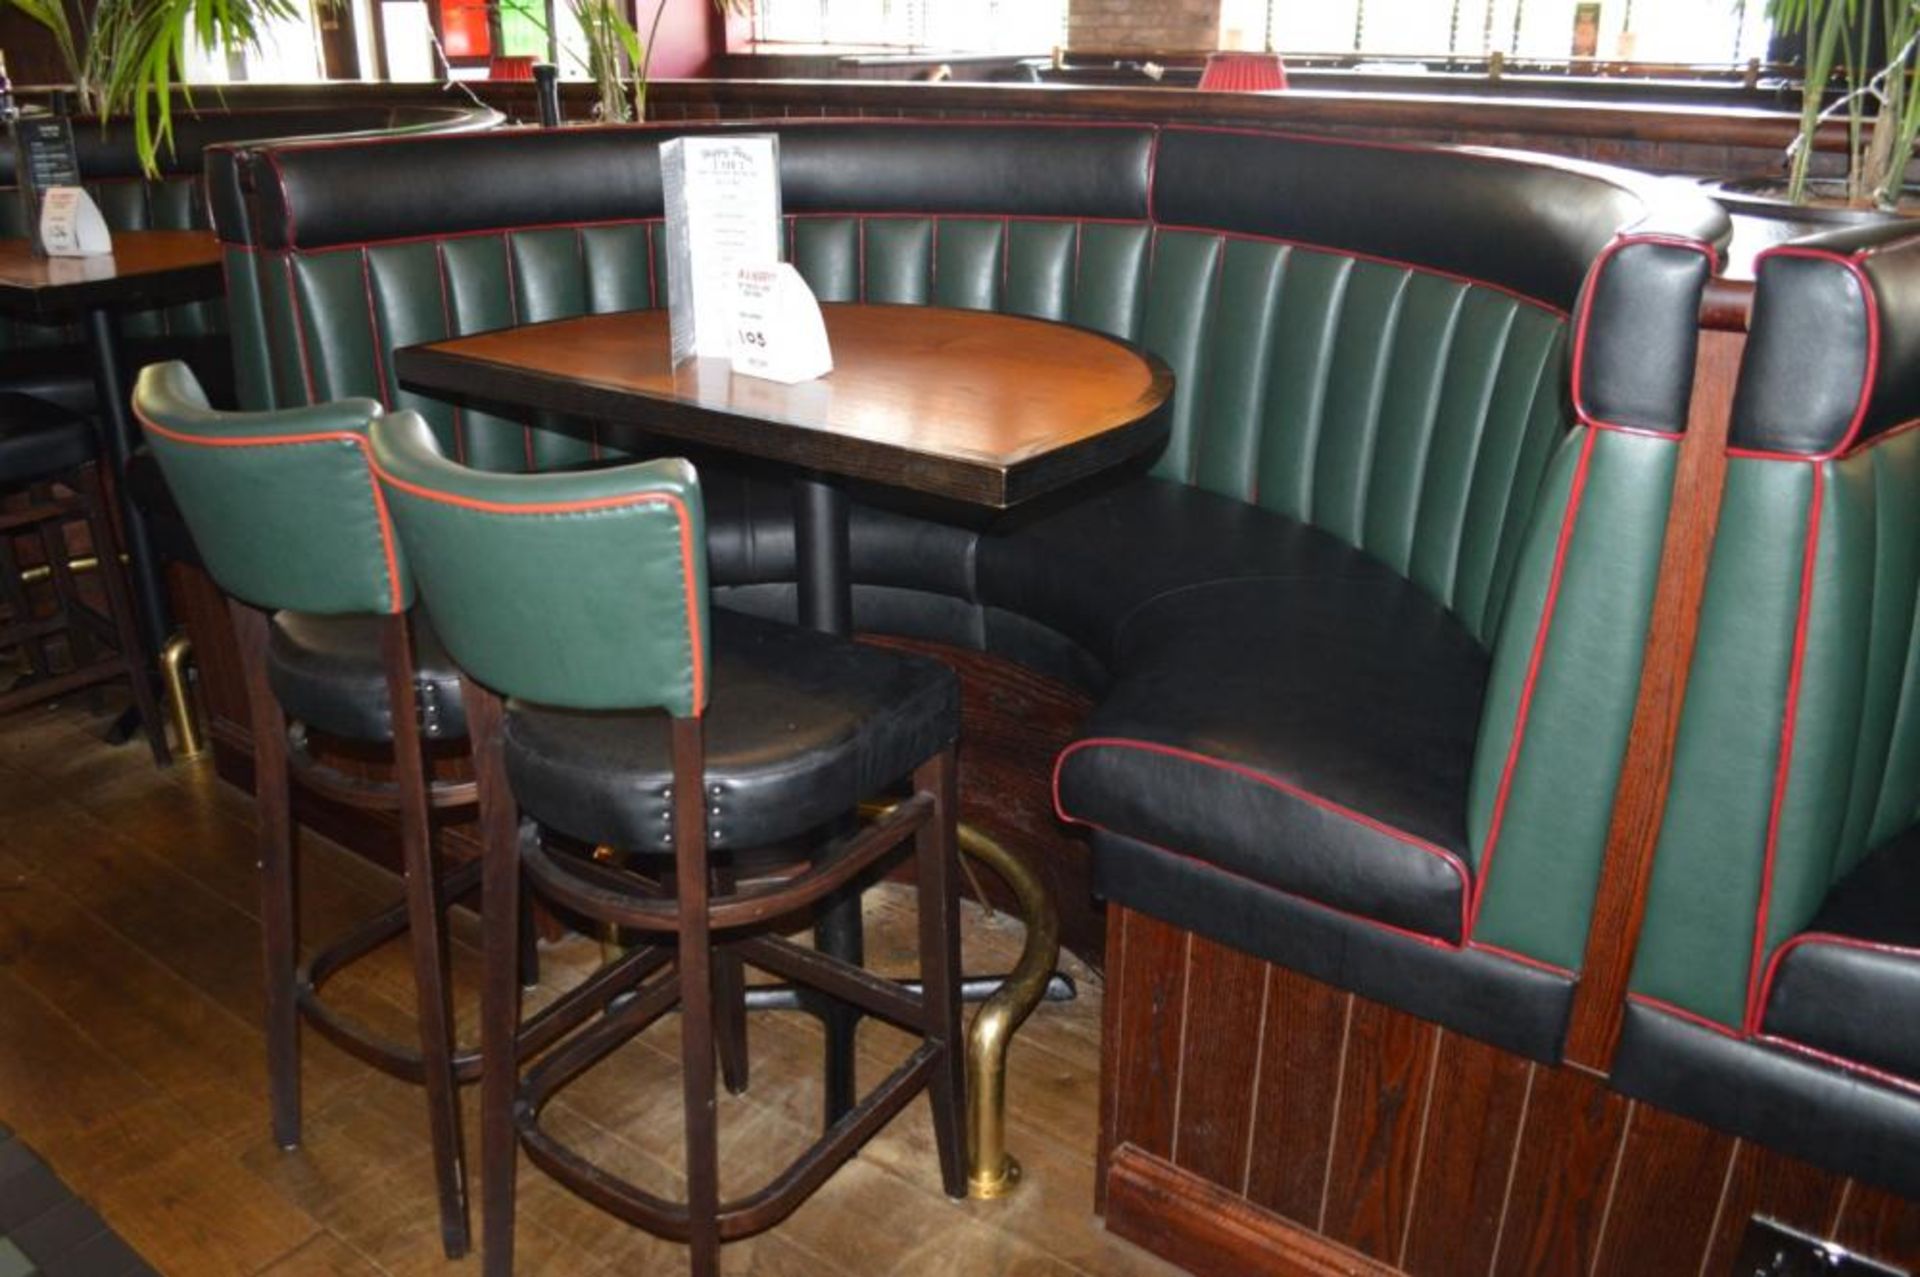 5 x Contemporary Half Circle High Seat Booths - Features a Leather Upholstery in Green and Black, - Image 11 of 11